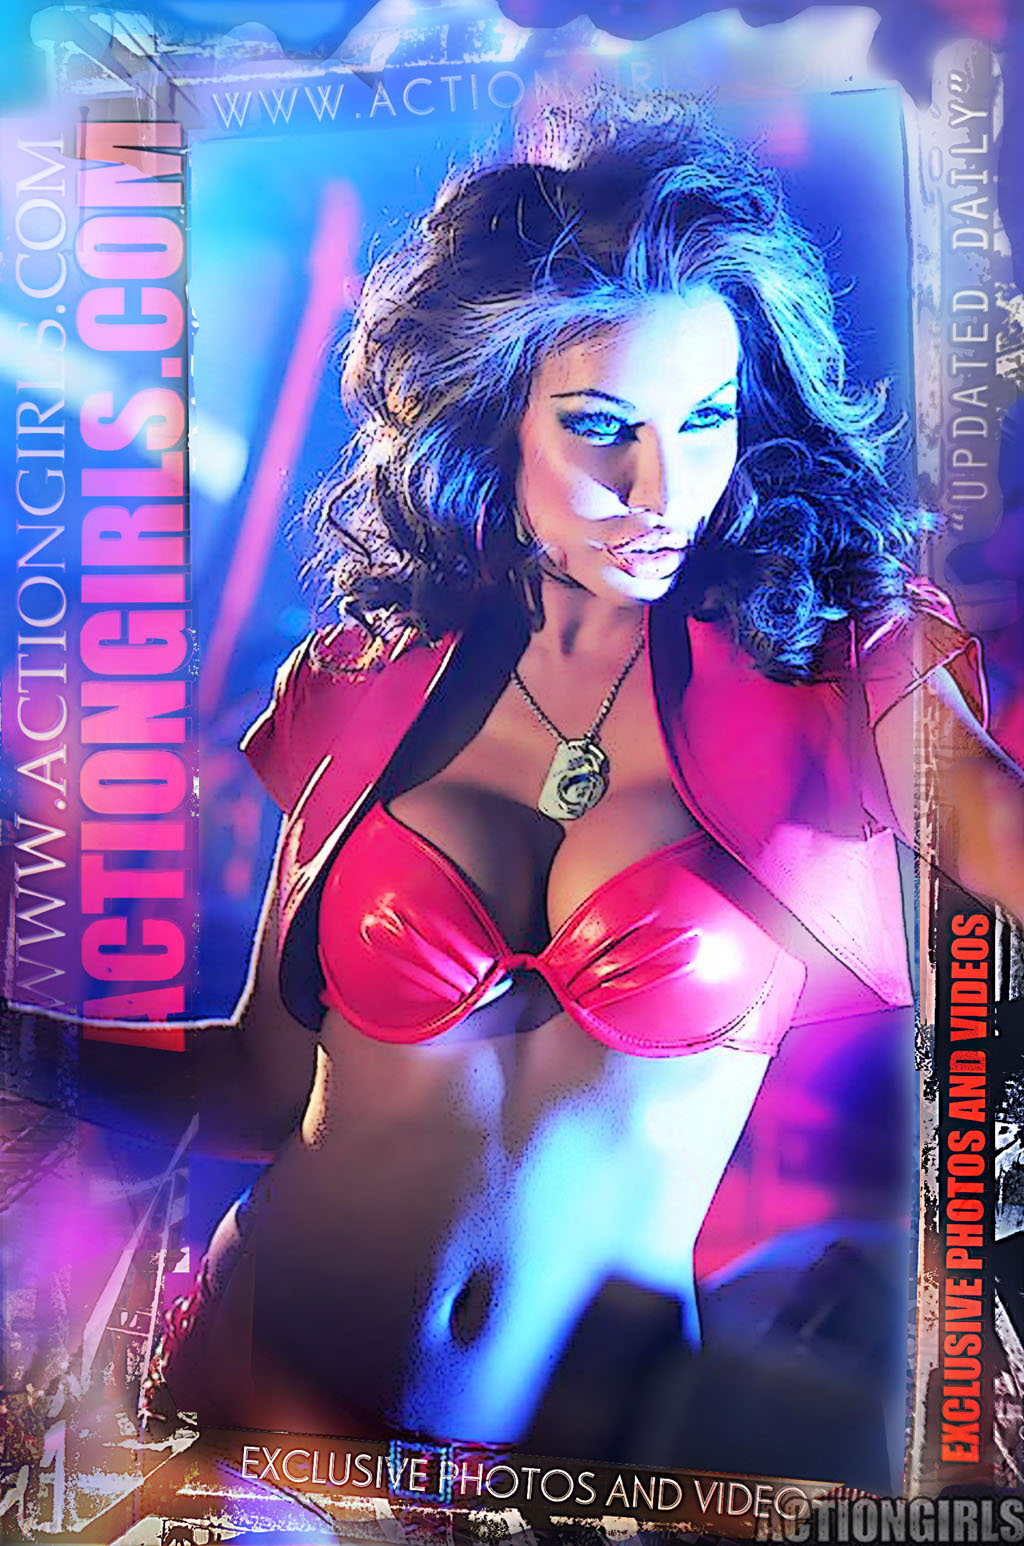 Actiongirls 2012 Web Posters